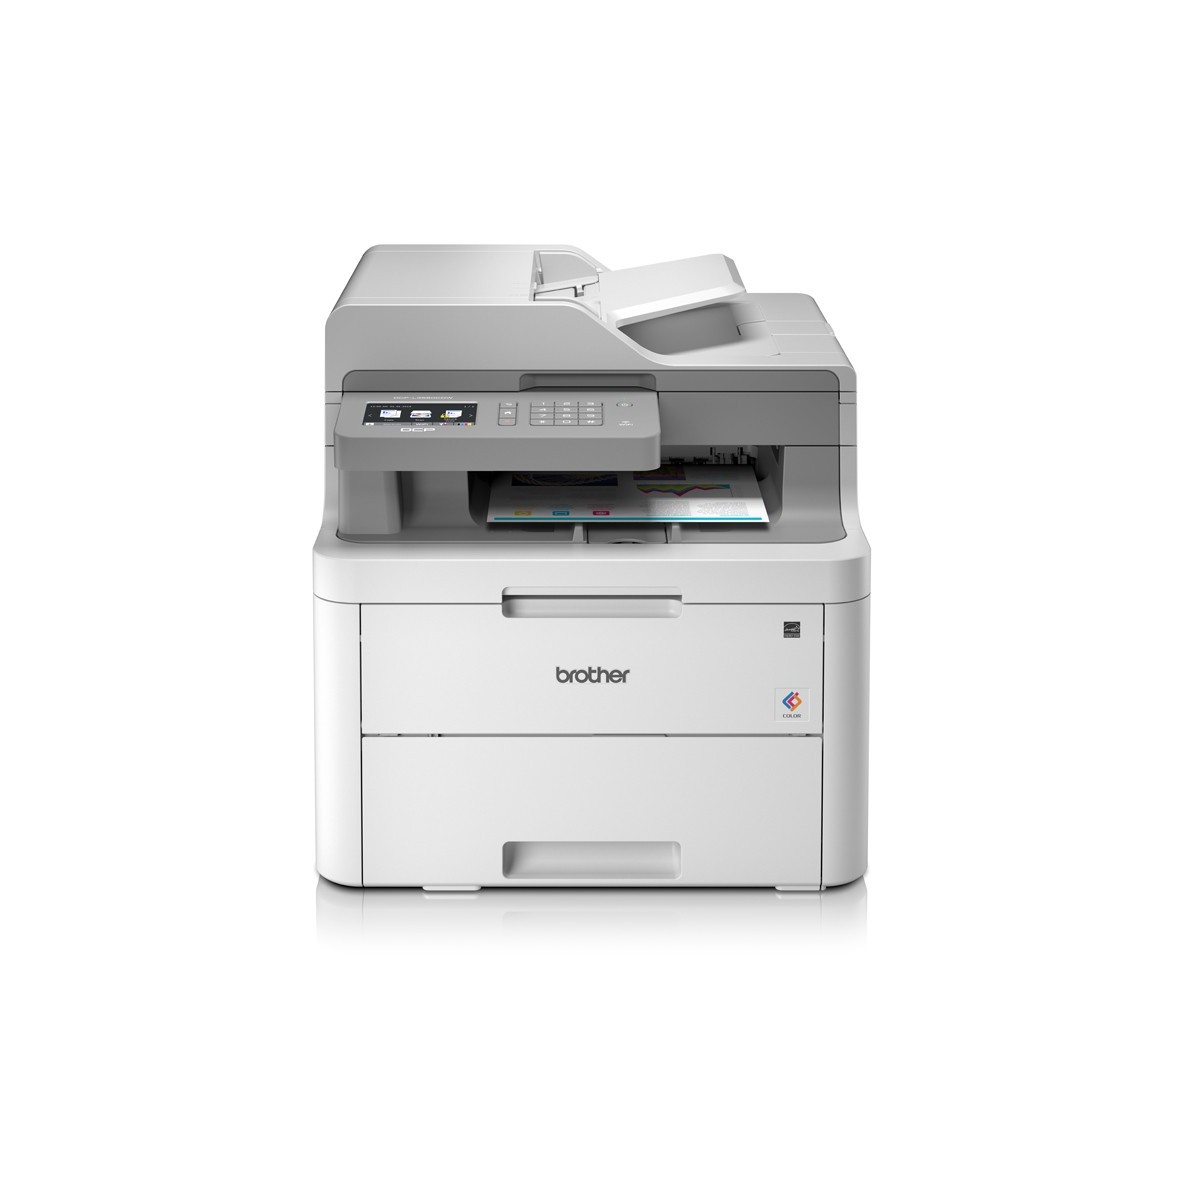 Brother DCP-L3550CDW - LED - Color printing - 2400 x 600 DPI - Color copying - A4 - Gray